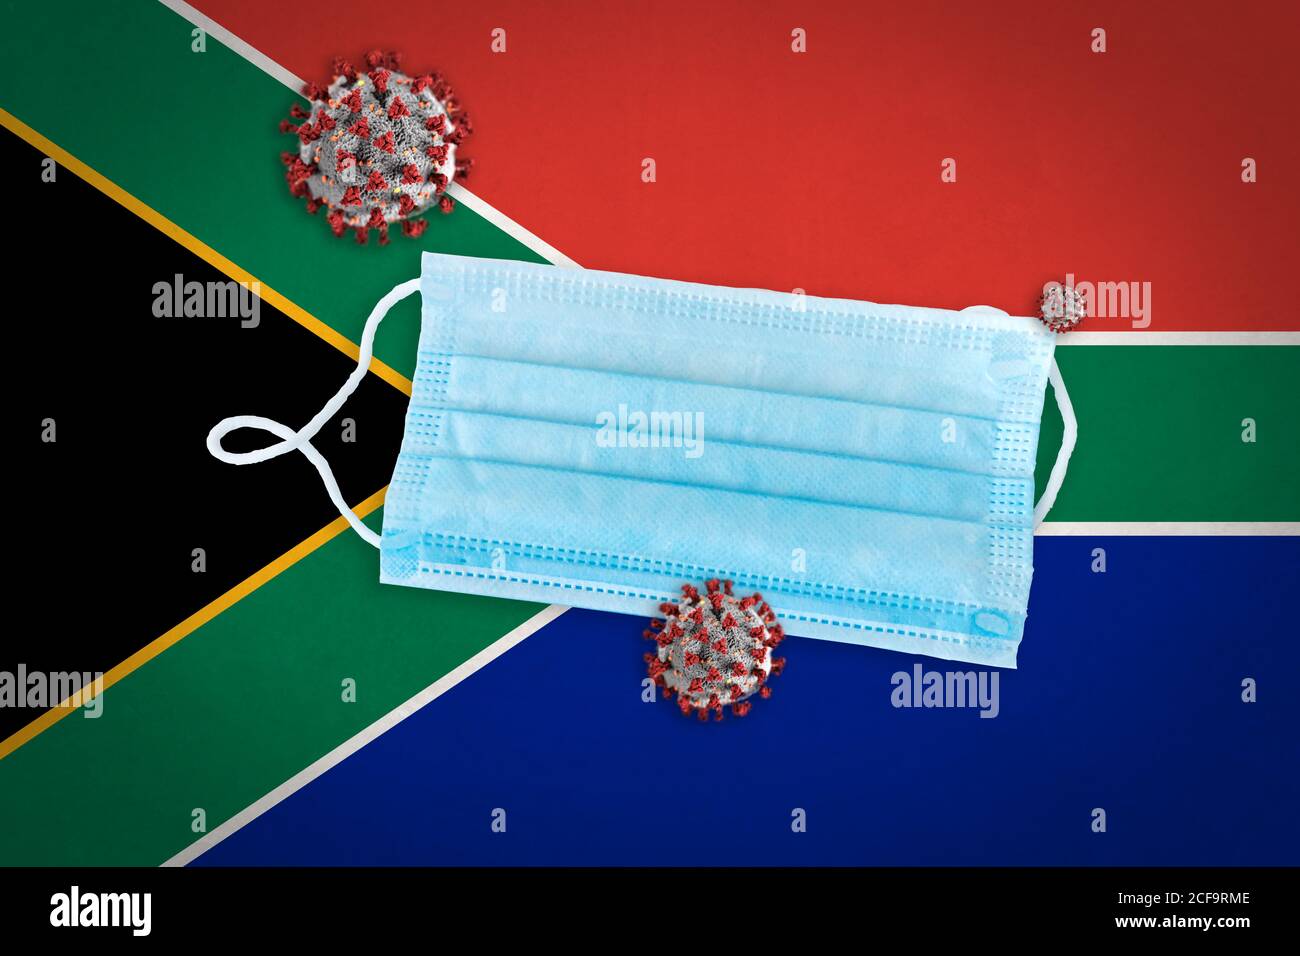 Concept of Coronavirus or Covid-19 particles and surgical face mask over flag of South Africa in background. Stock Photo